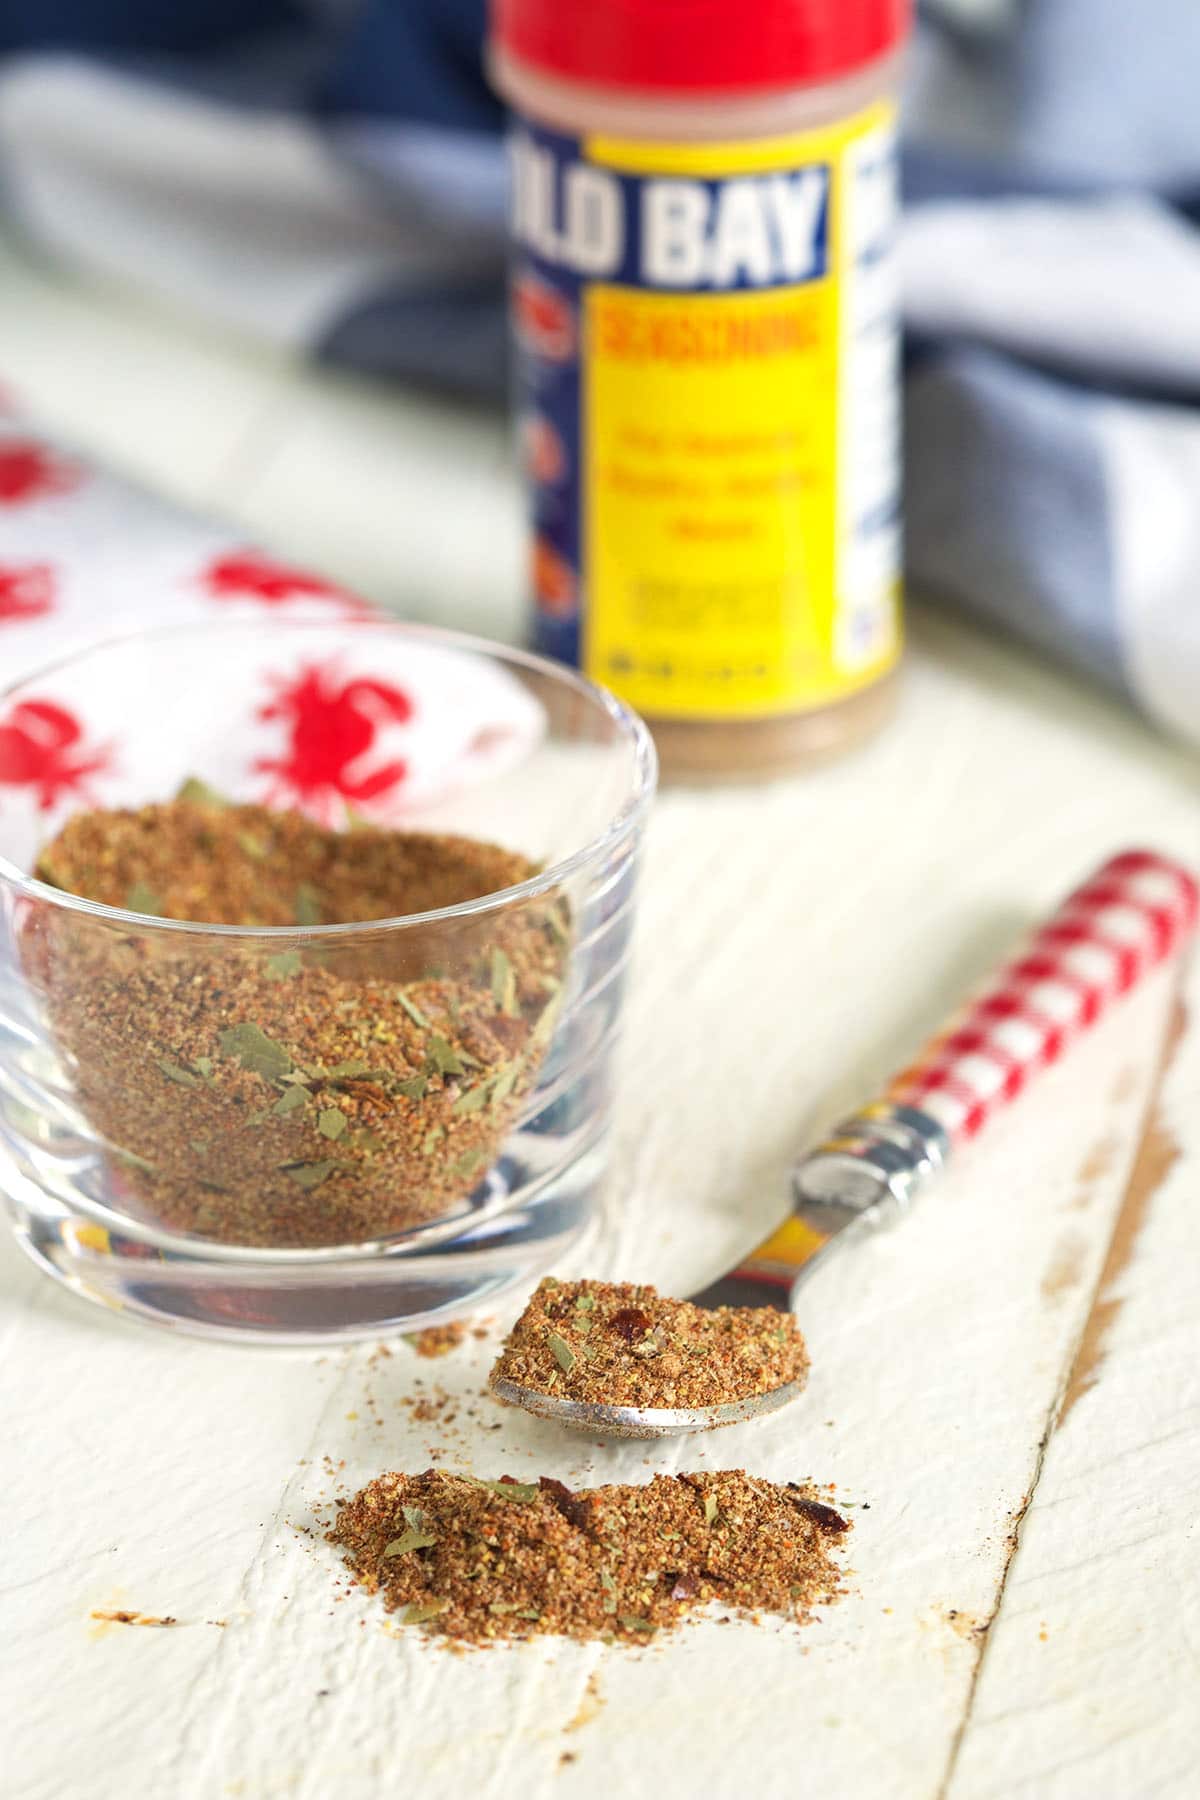 A spoon and small glass container are filled with portions of old bay seasoning. 